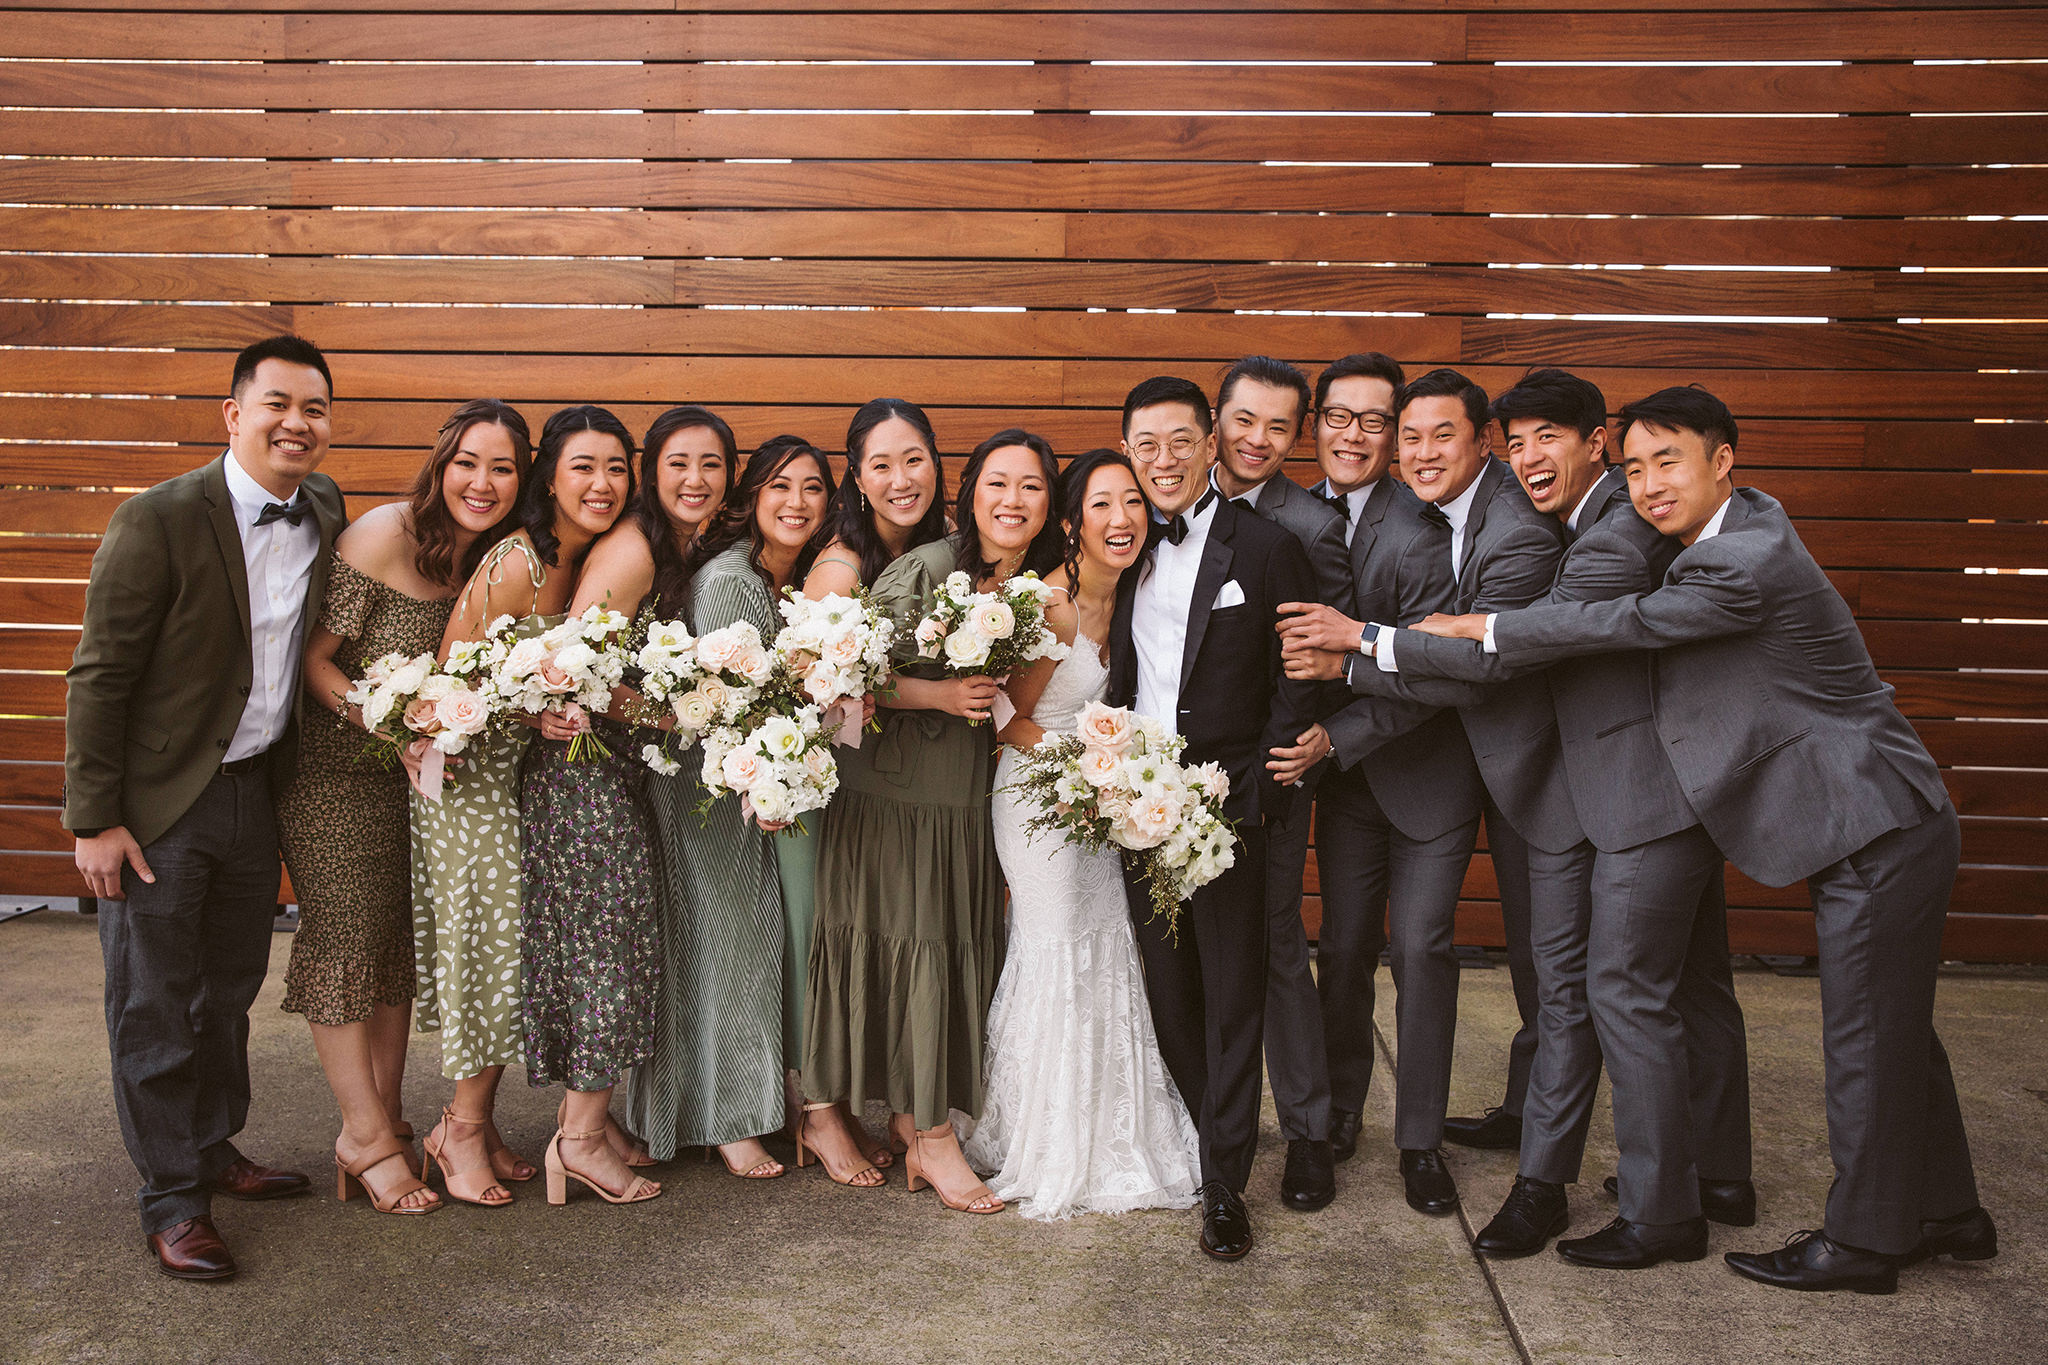 A bride and groom with their wedding party at Castaway in Portland, Oregon